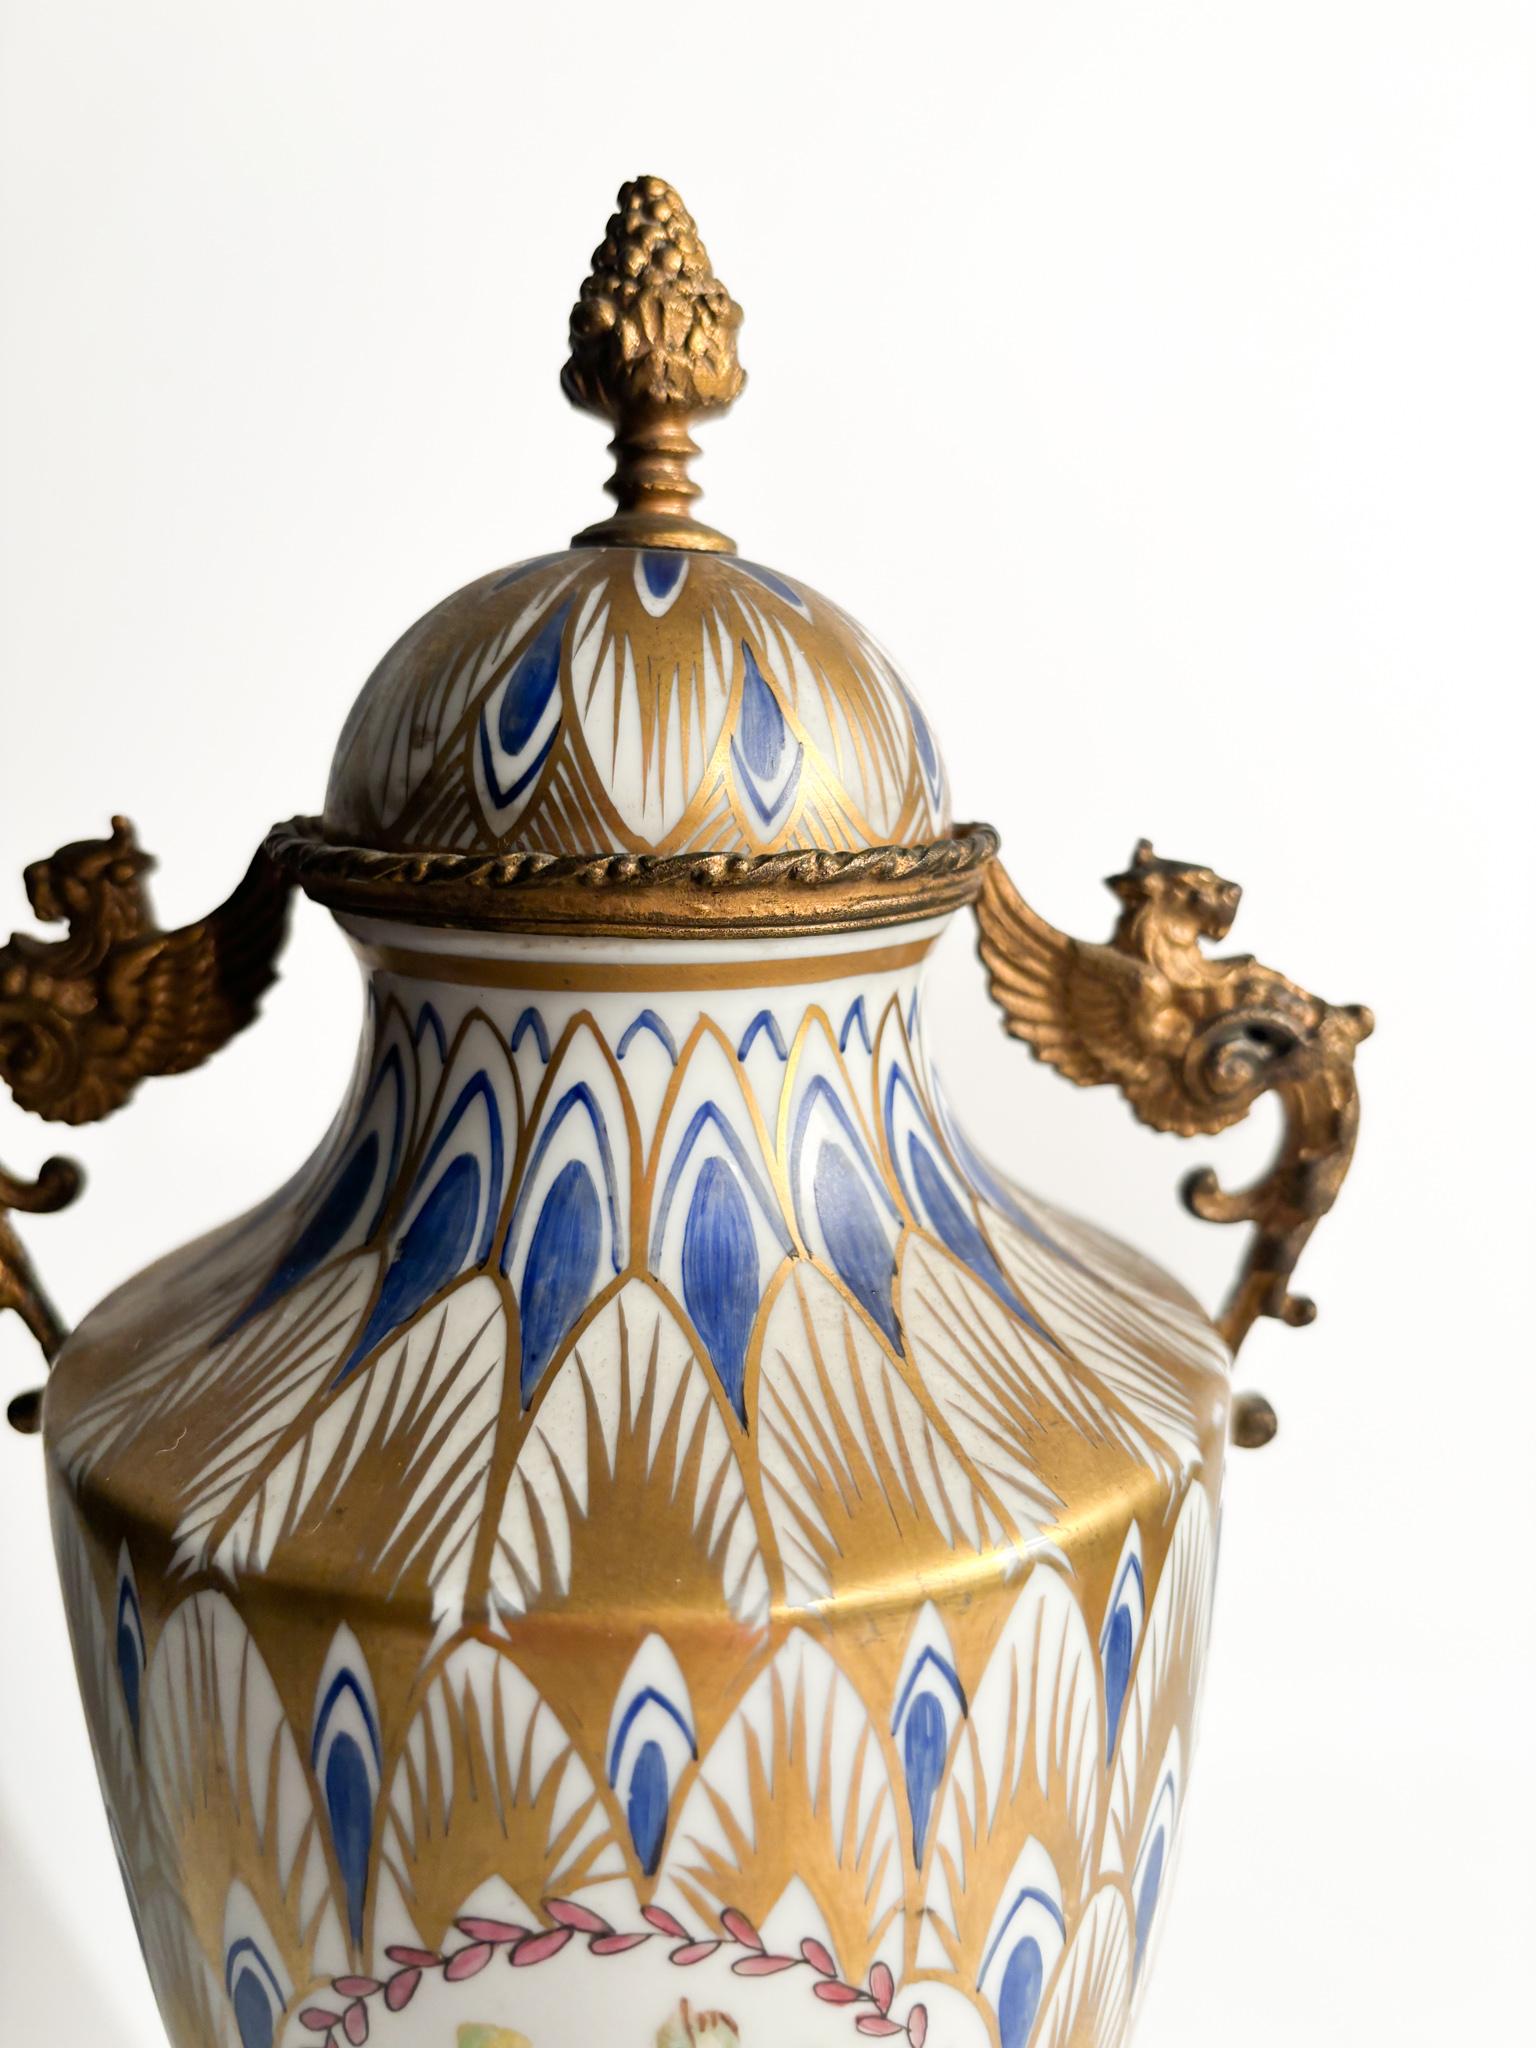 Vase in Sevres porcelain and hand-painted bronze made in 1800

Ø cm 15 h cm 32

The Sèvres ceramics are one of the most famous ceramic manufacturers in all of Europe, born in France in the 18th century. From the beginning the production stood out